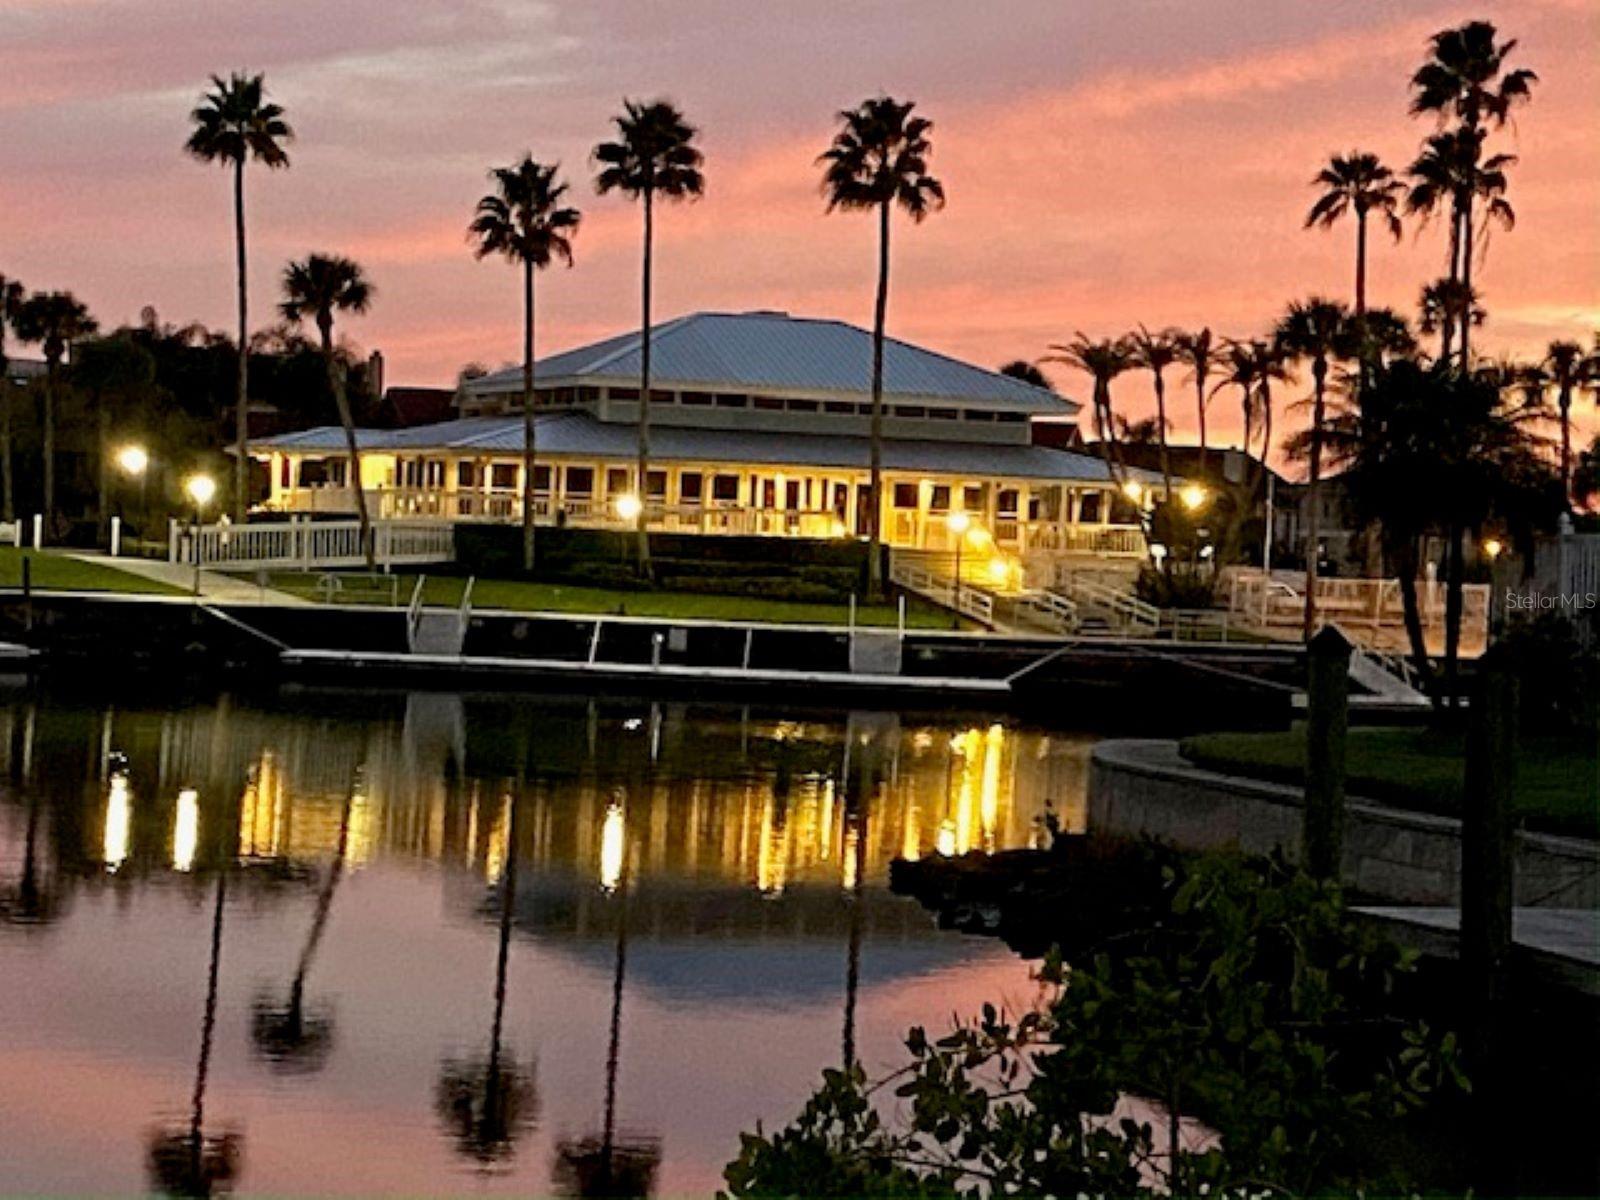 Gulf Harbors clubhouse within walking distance.